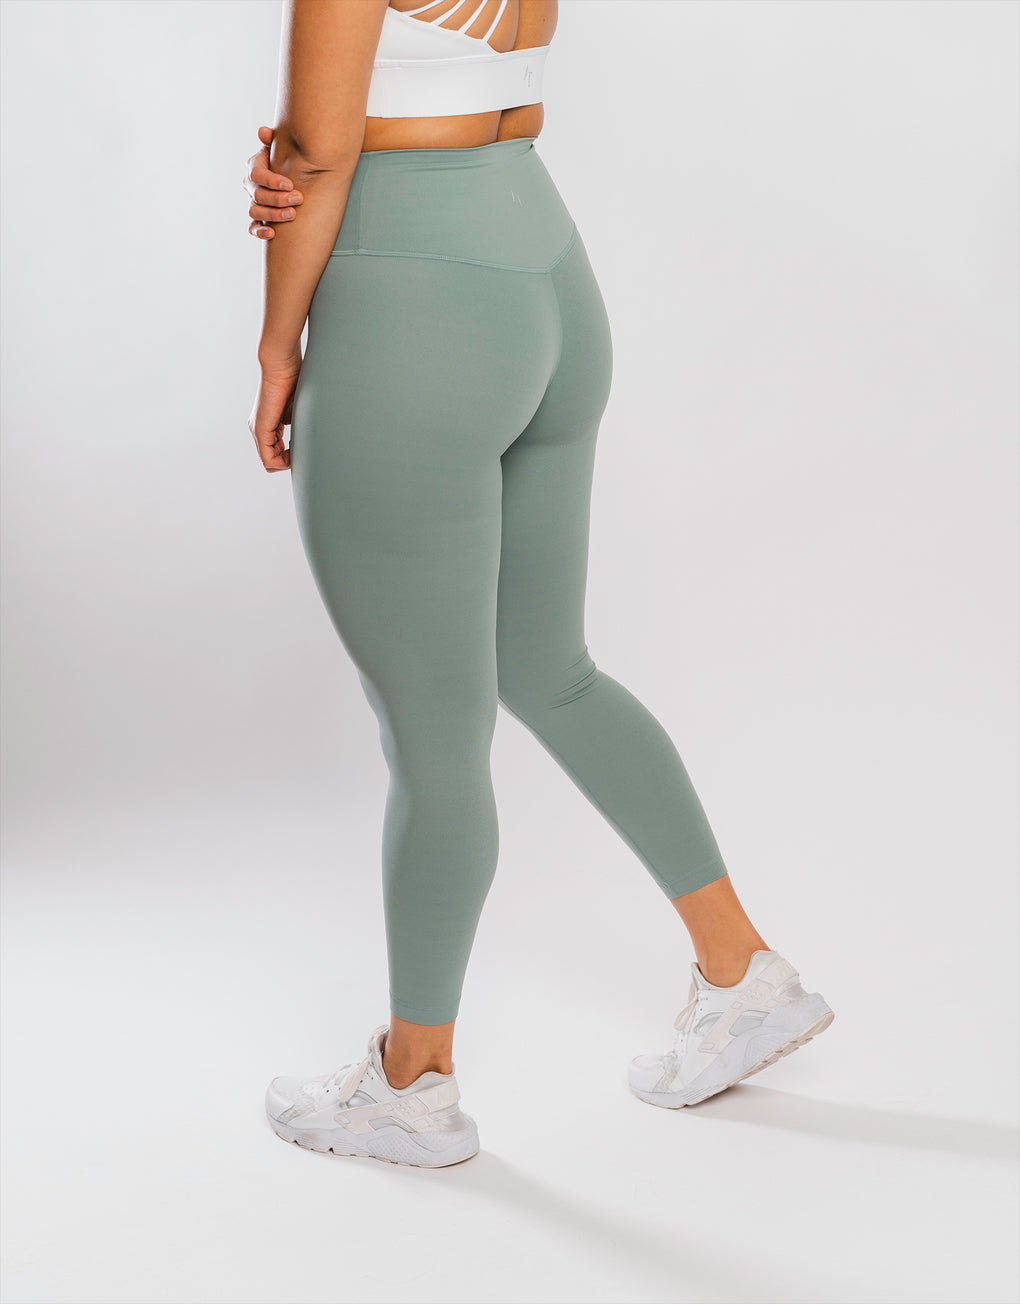 Women's Sculpted Linear Laser Cut High-Waisted 7/8 Sports Yoga Leggings/Pants  25' Olive Green High-Intensity Fitness Classes, Interval Training, Cardio,  Spin - China Sports Leggings and Yoga Leggings price